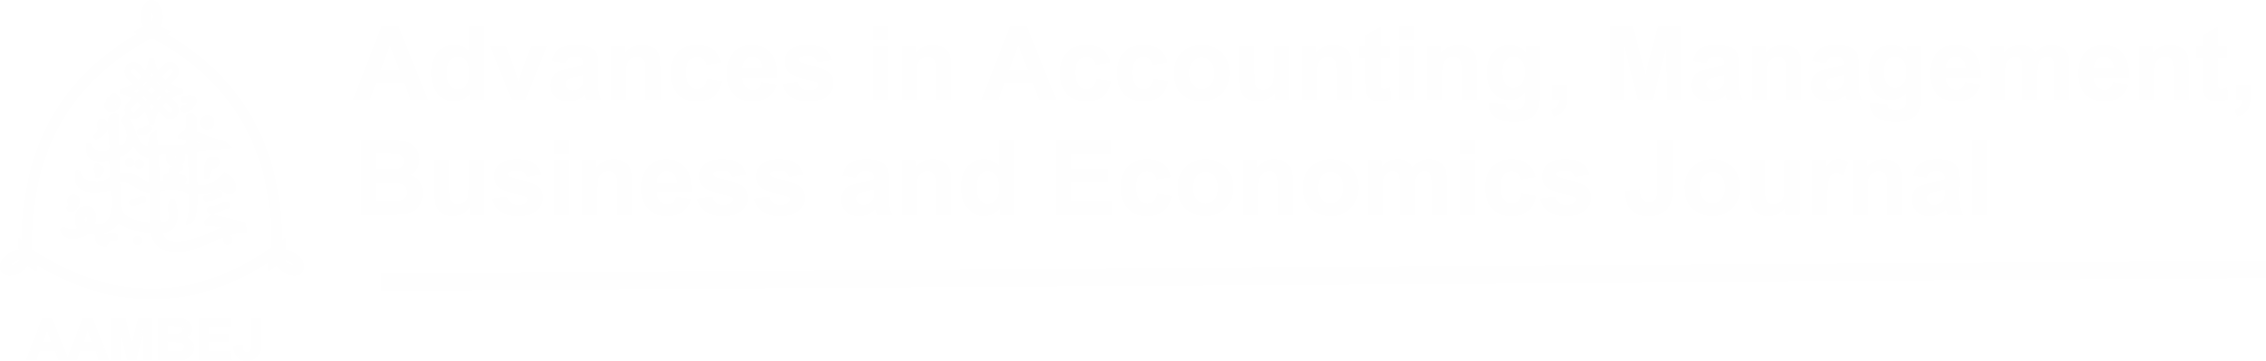 ADVANCES IN ACCOUNTING, MANAGEMENT, BUSINESS  AND ECONOMICS JOURNAL